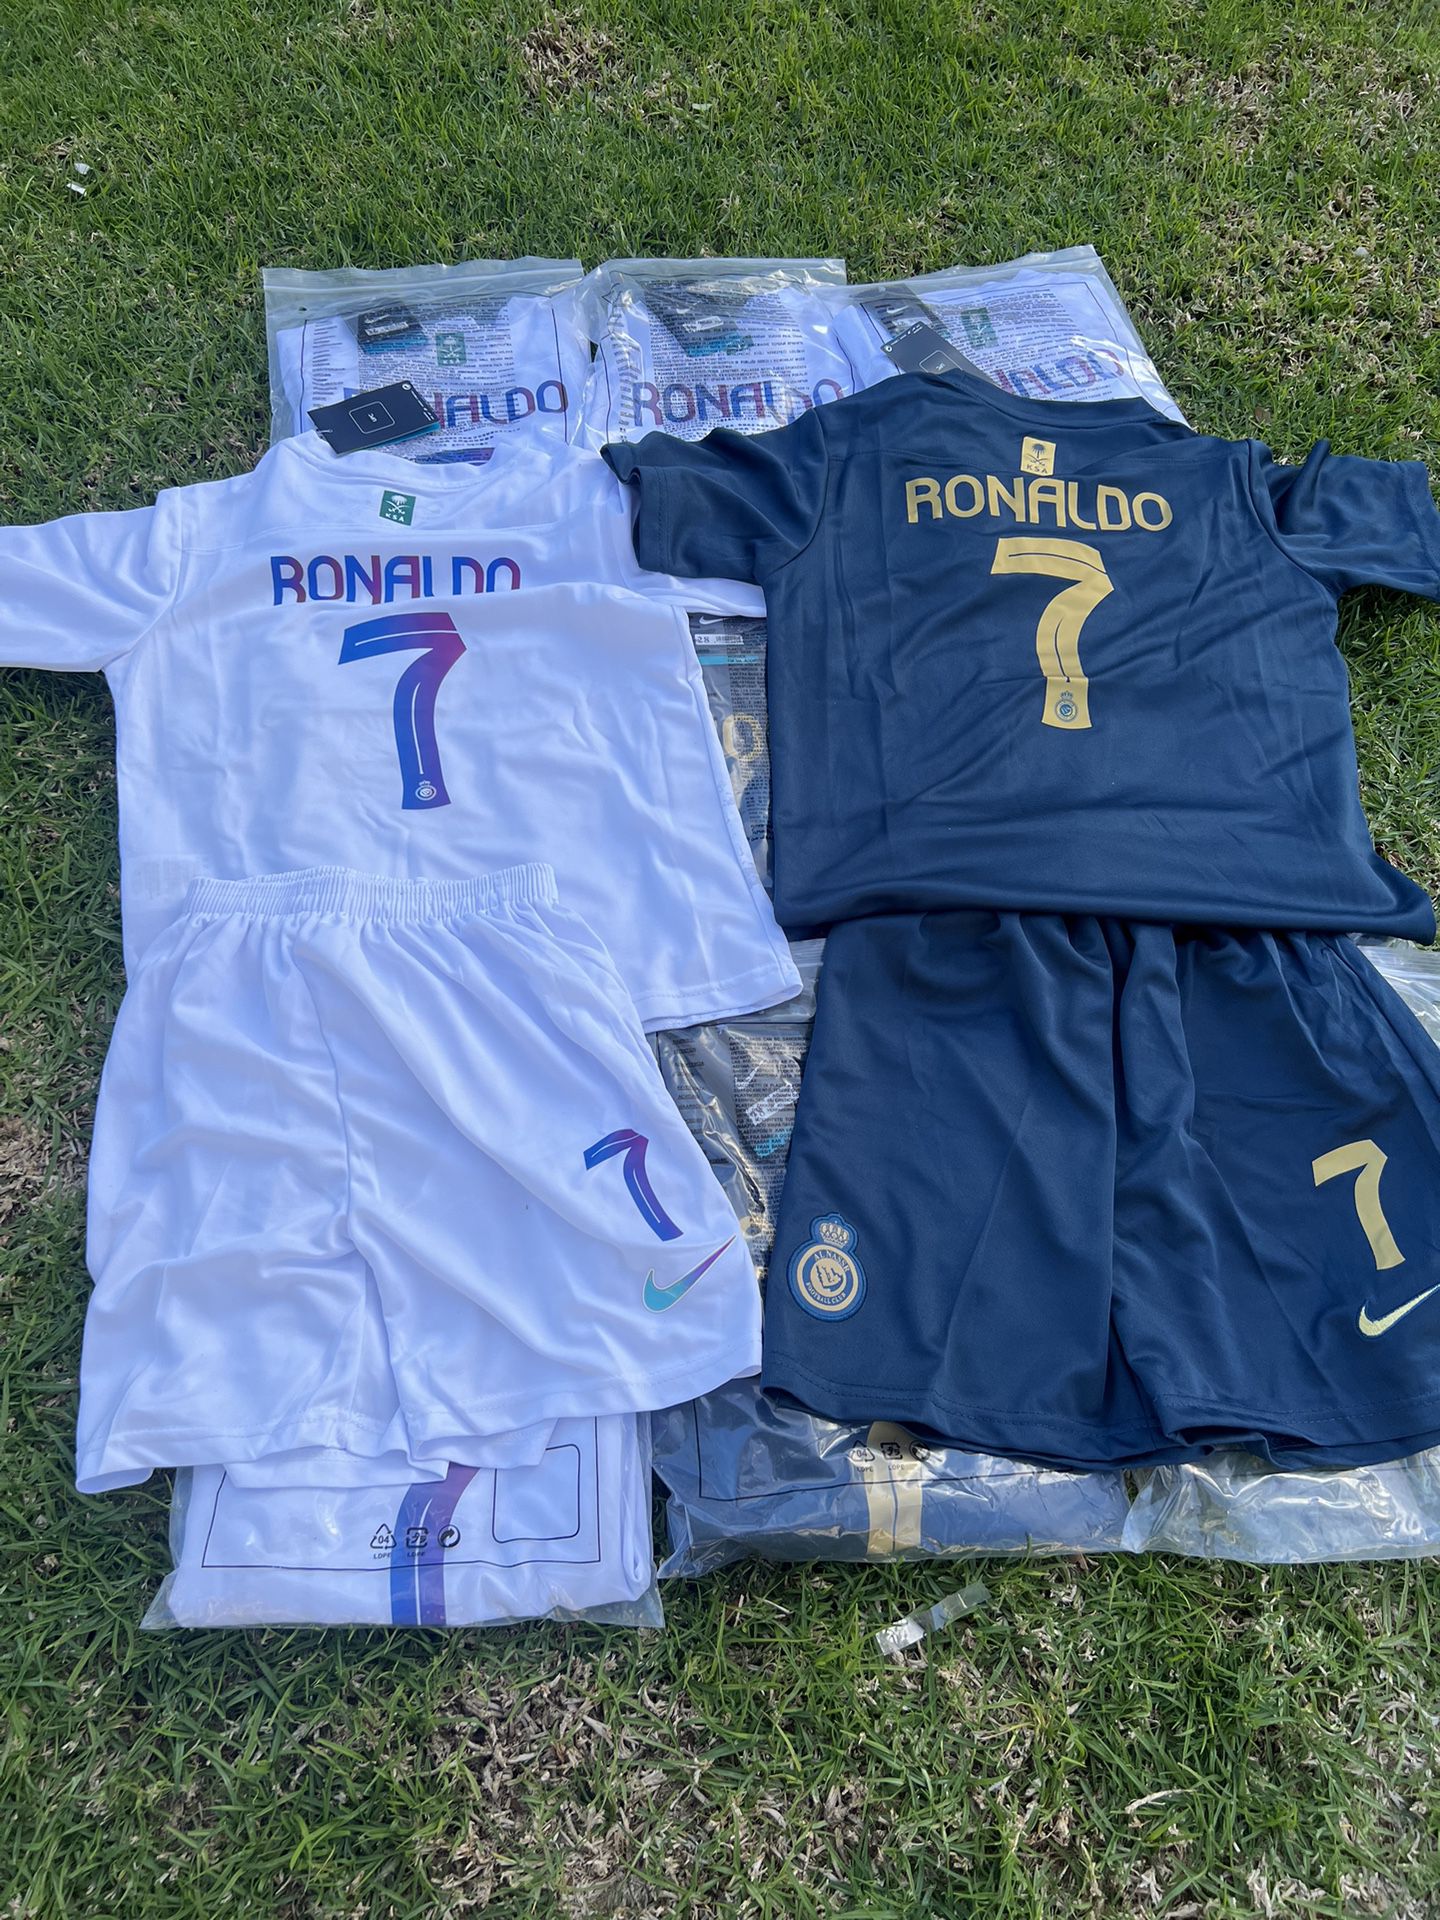 Cristiano Ronaldo CR7 Al-Nassr 23/24 Third Kit playera more jerseys available check my profile for prices and sizes  Portugal Jersey Ronaldo player ve